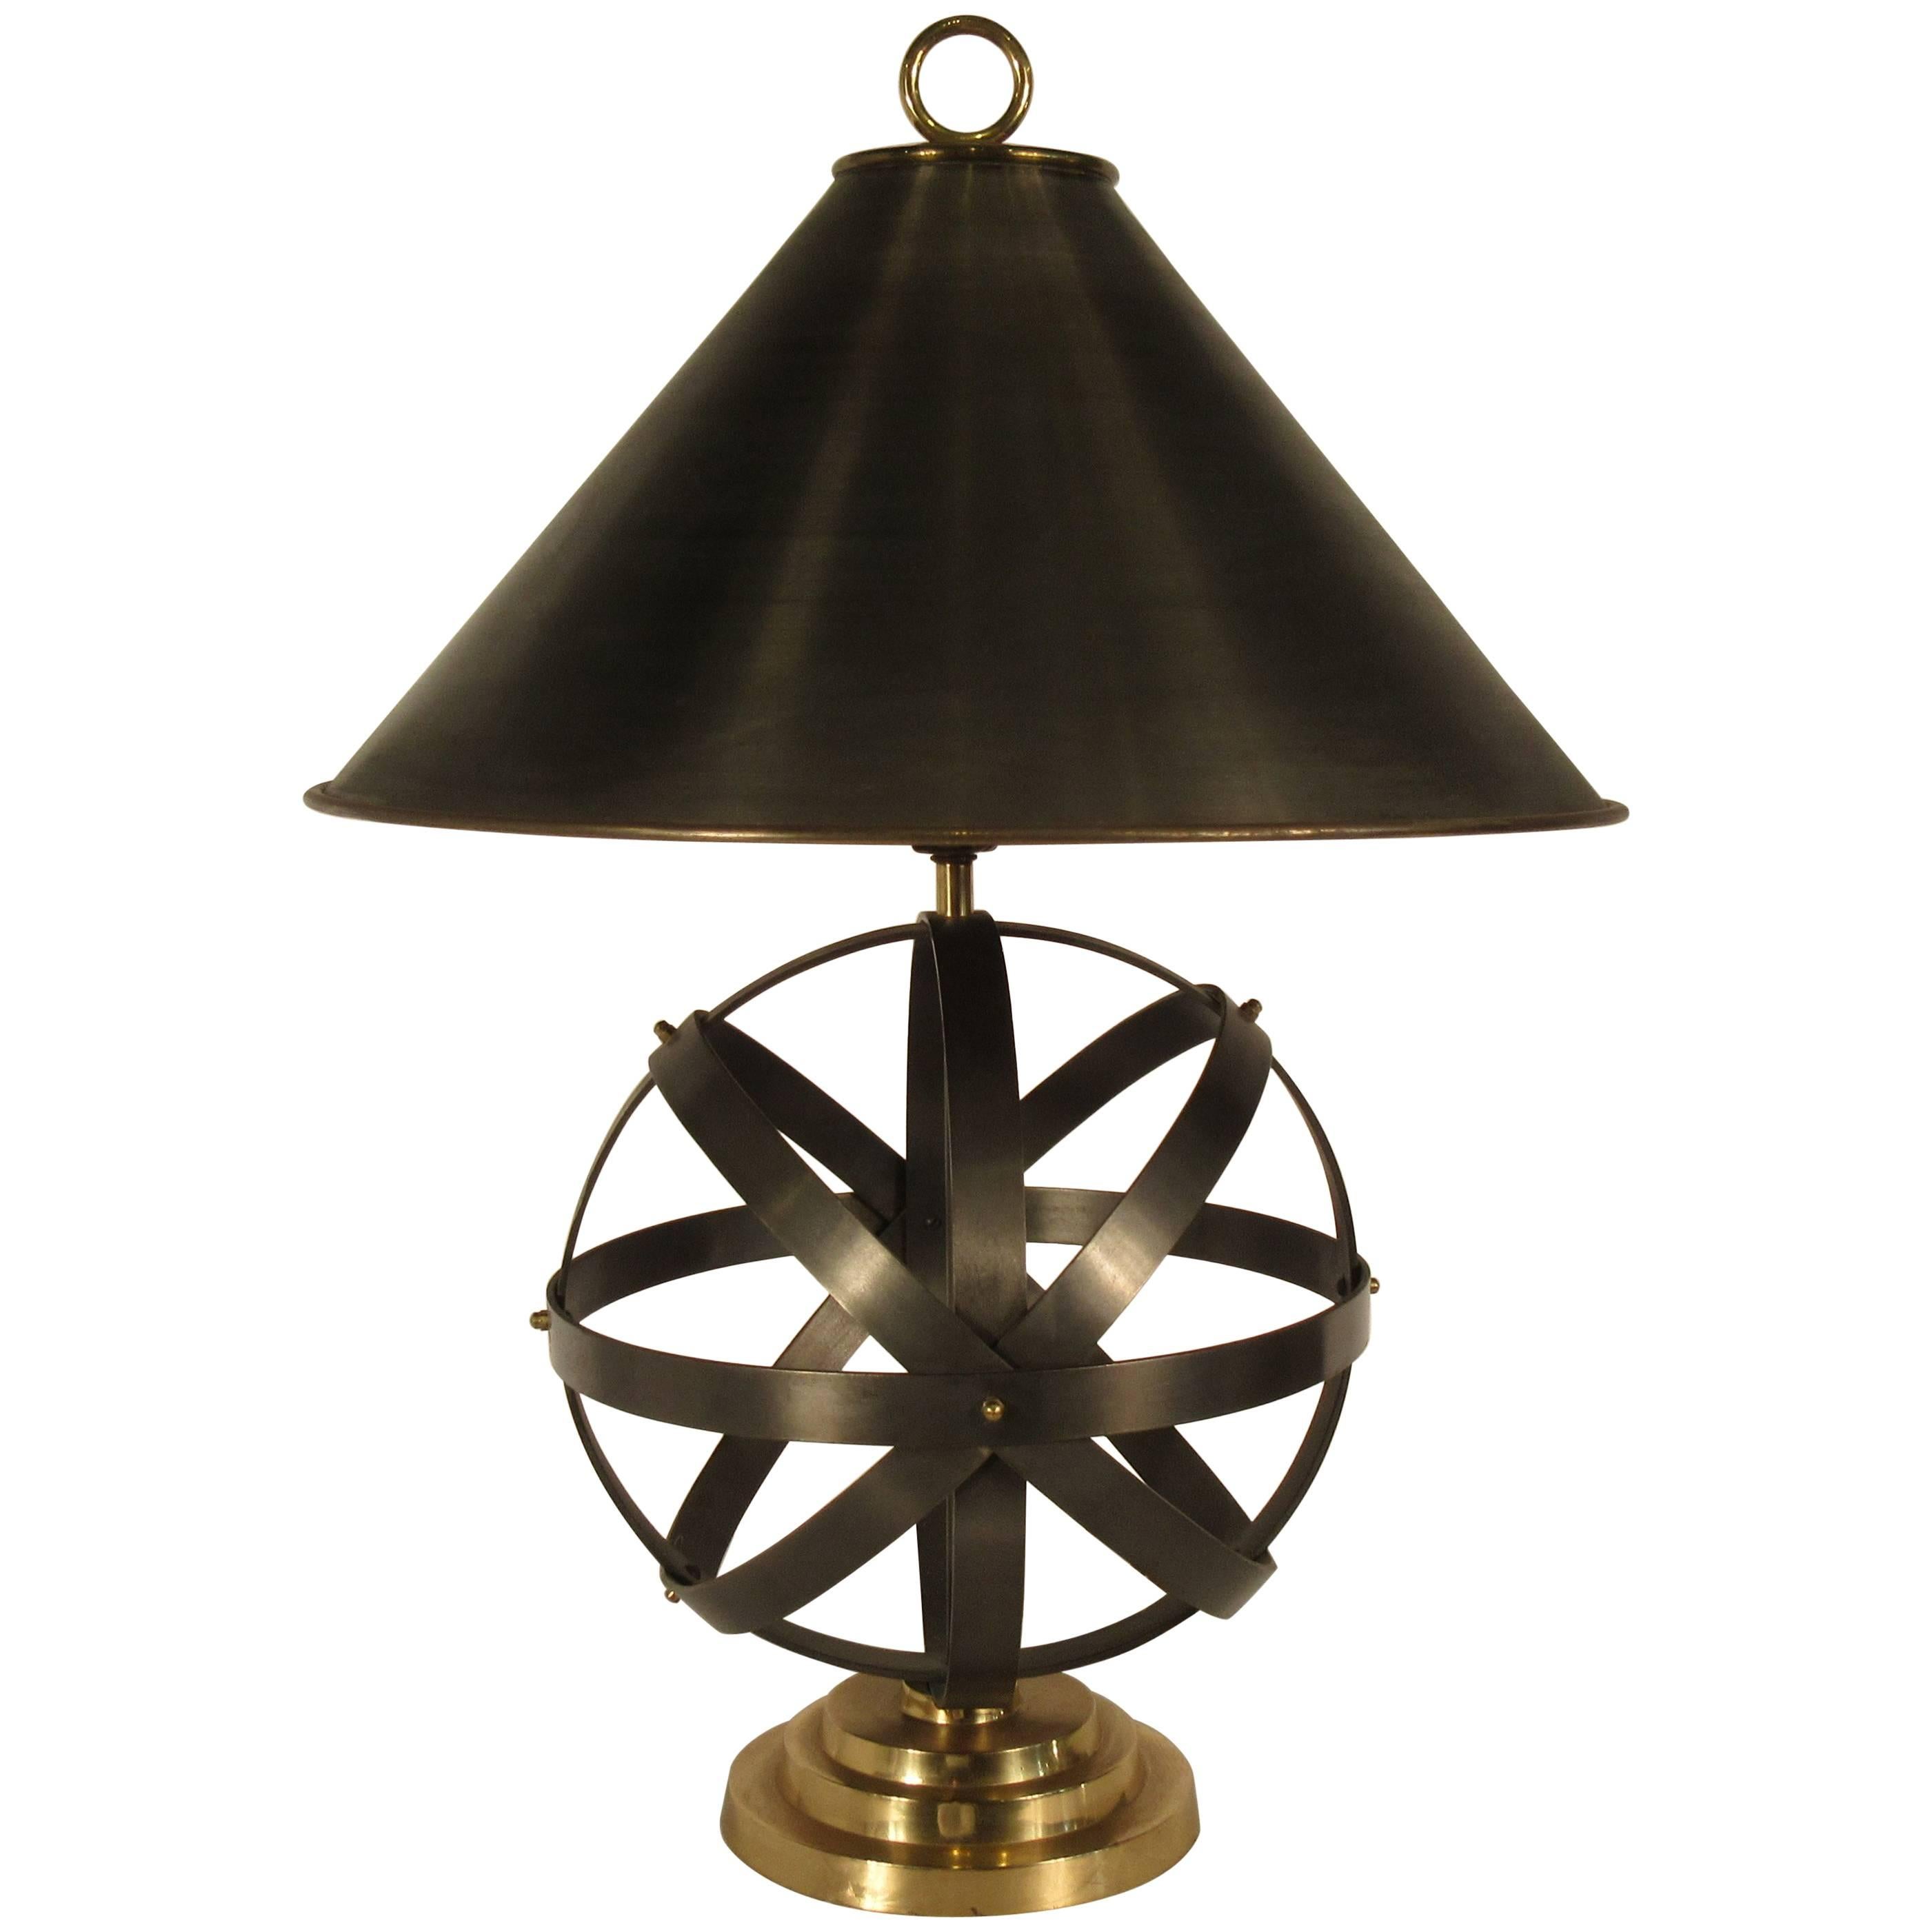 1970s Metal Orb Lamp With And, Texas Star Metal Lamp Shade